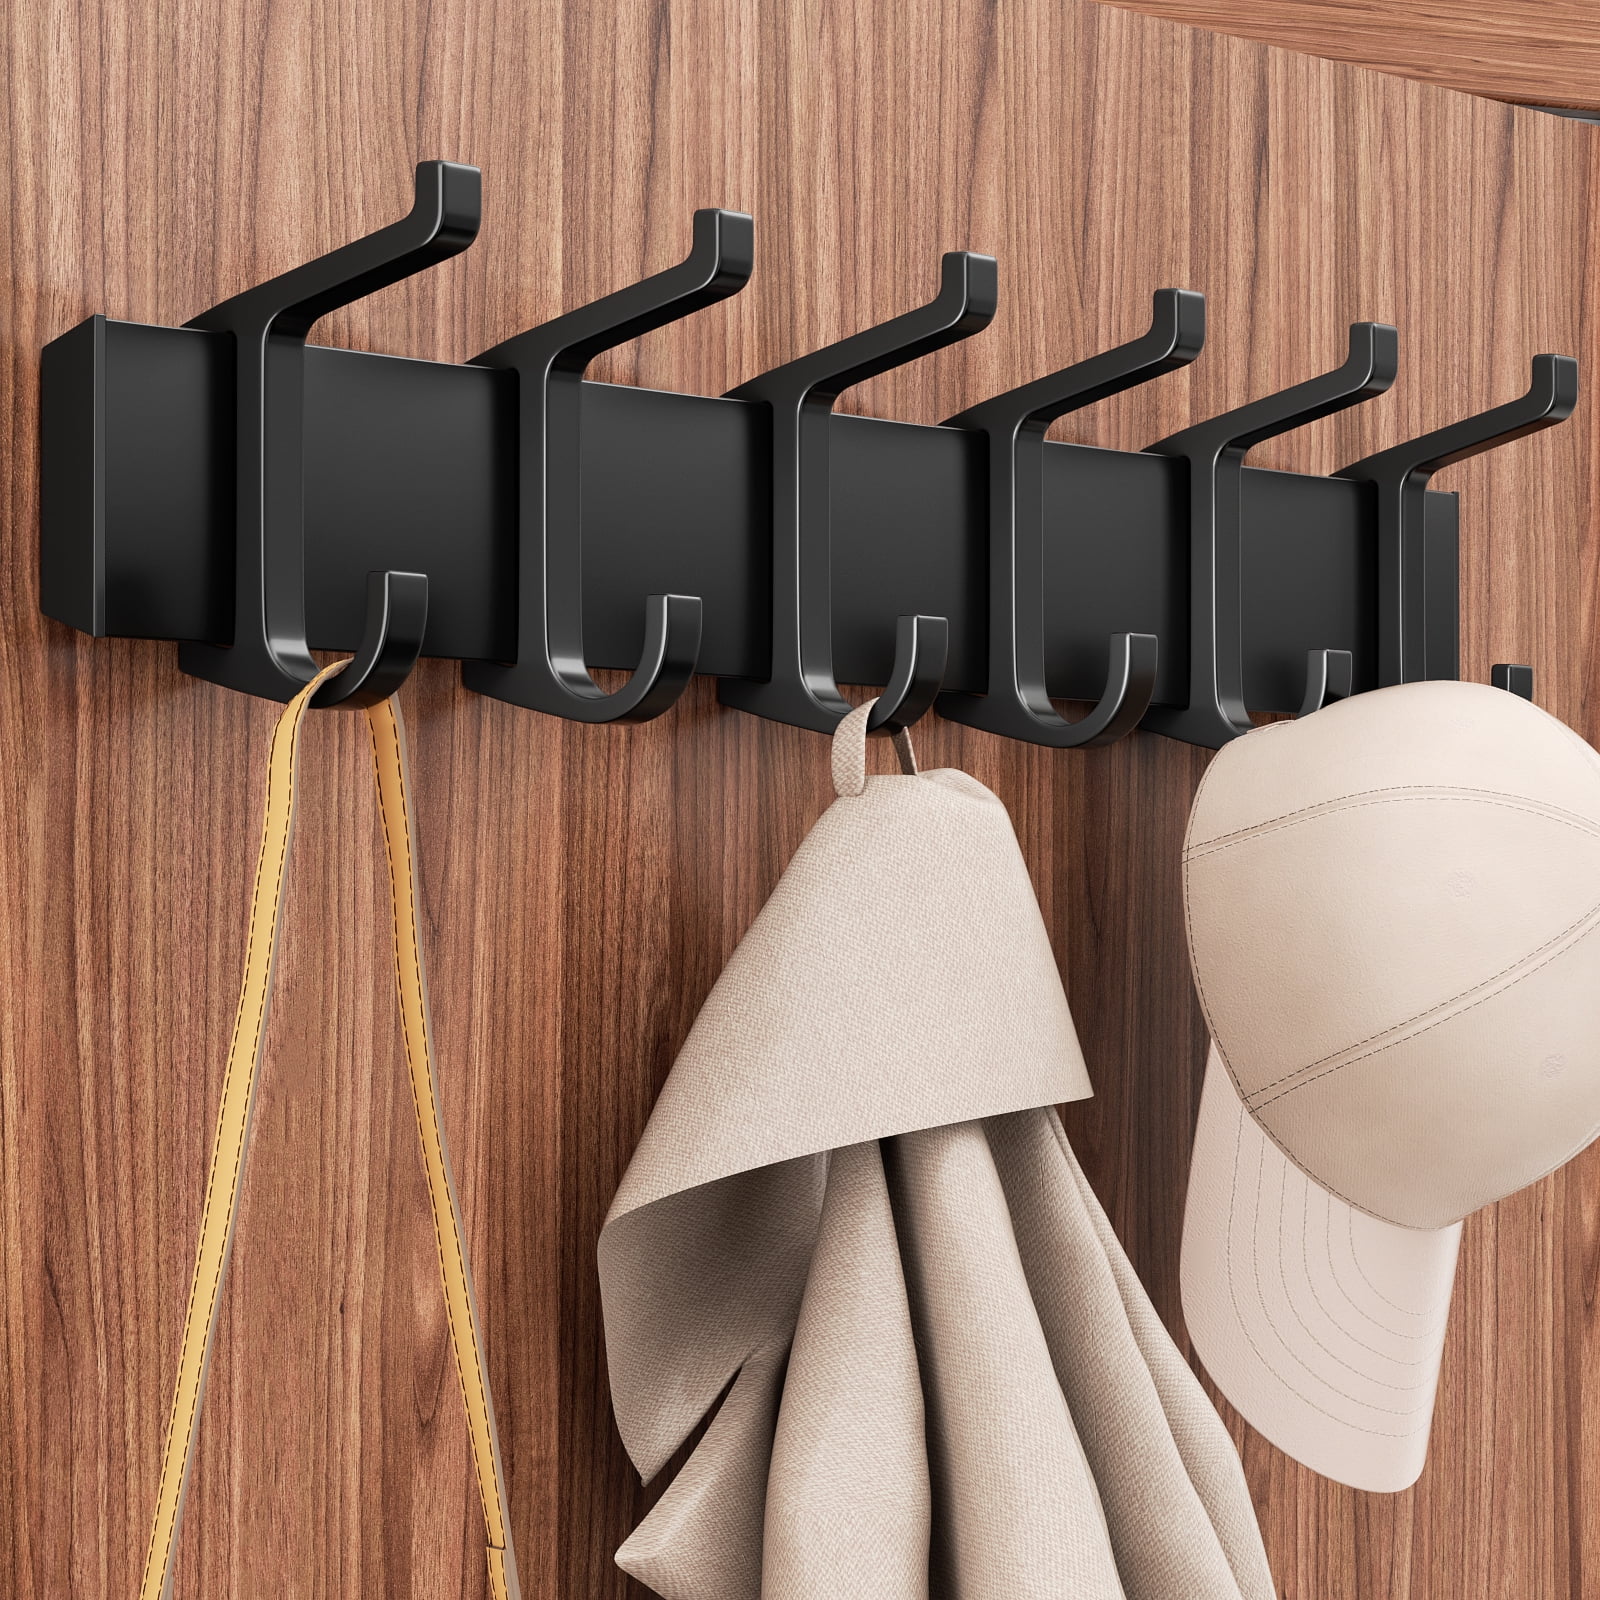 Modern JP Adhesive Hat Hooks for Wall (10-Pack) - Minimalist Hat Rack Design, No Drilling, Strong Hold Hat Hangers(White)